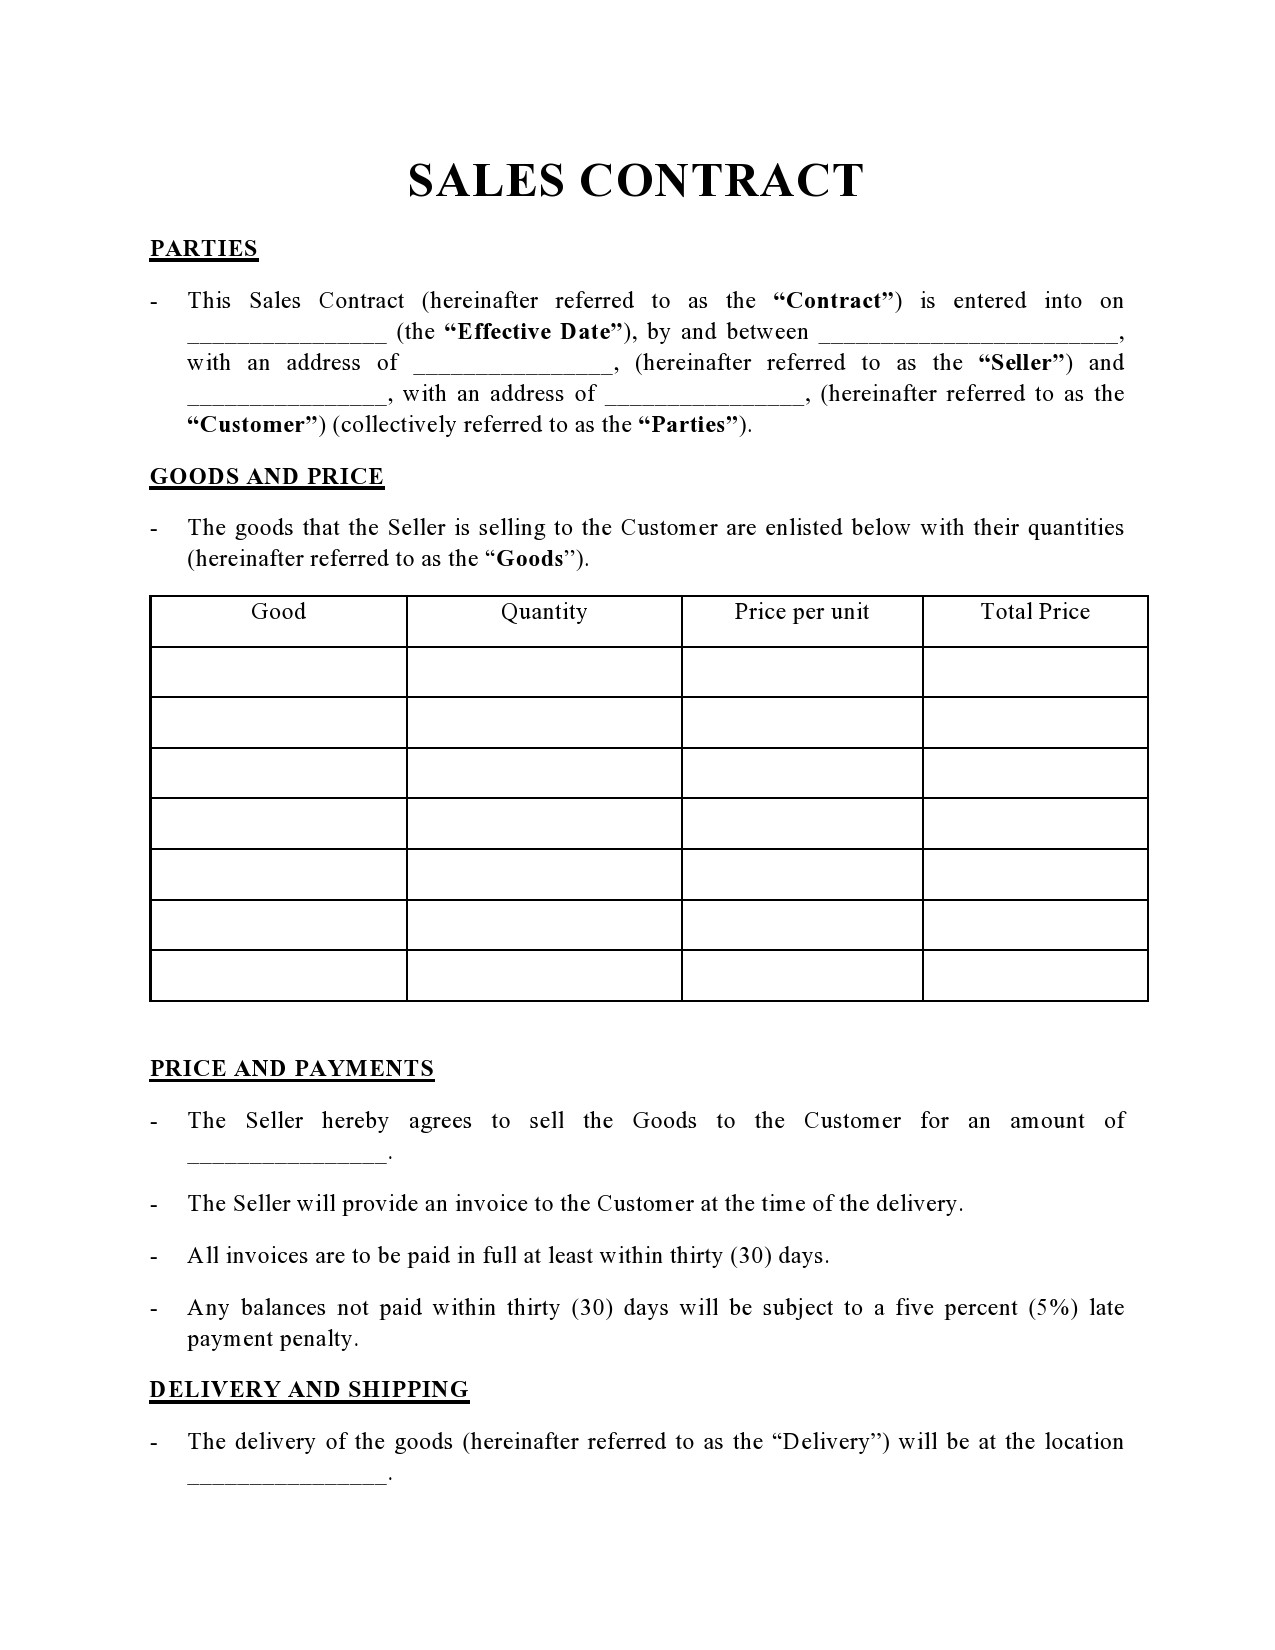 Free sales contract template 10